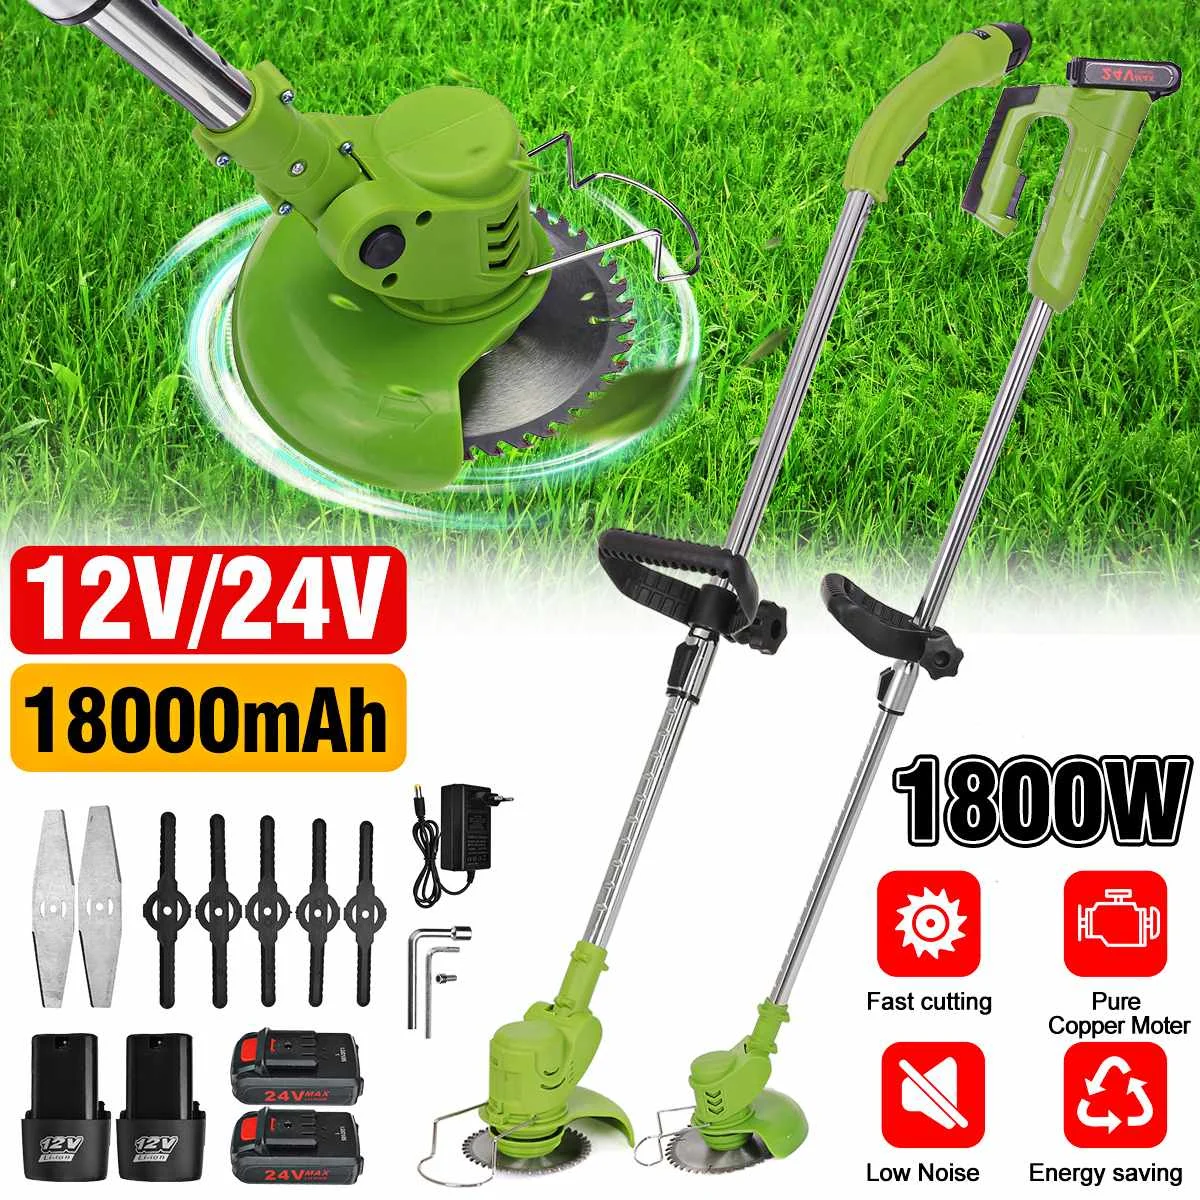 

24V Electric Lawn Mower 1800W Cordless Grass Trimmer Mowing Machine Grass Cutter Pruning Garden Power Tools With Li-ion Battery